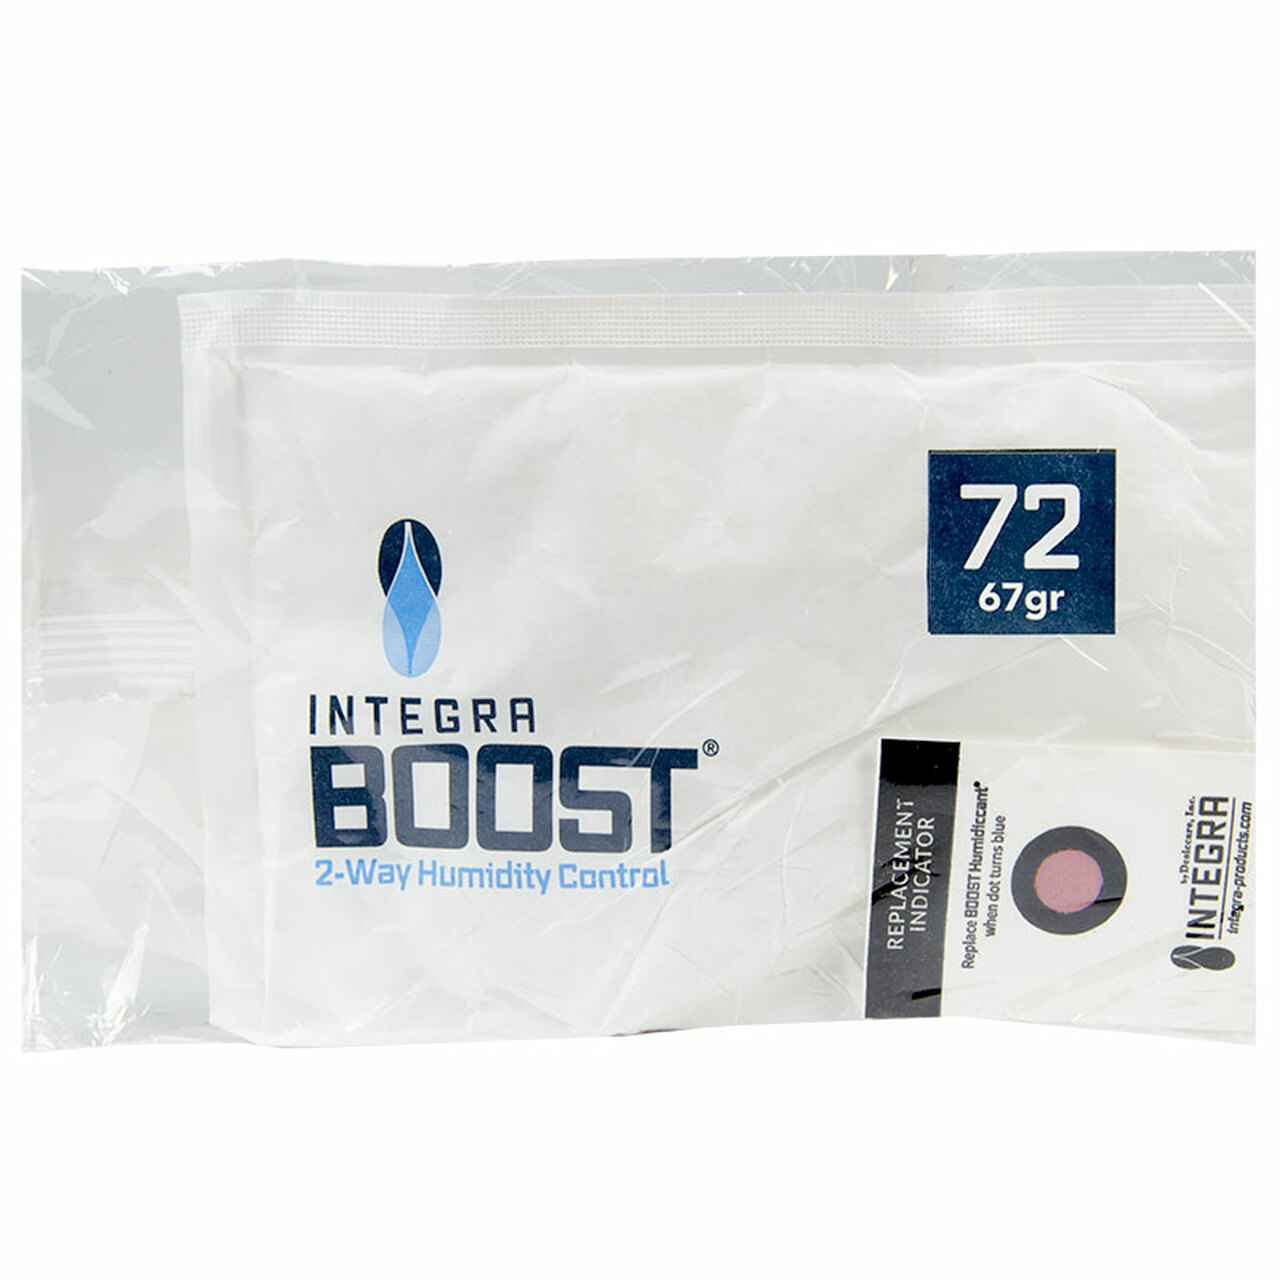 Desiccare 67 gram Integra BOOST® 72% RH 2-way humidity control packs with humidity indicator cards (HIC)